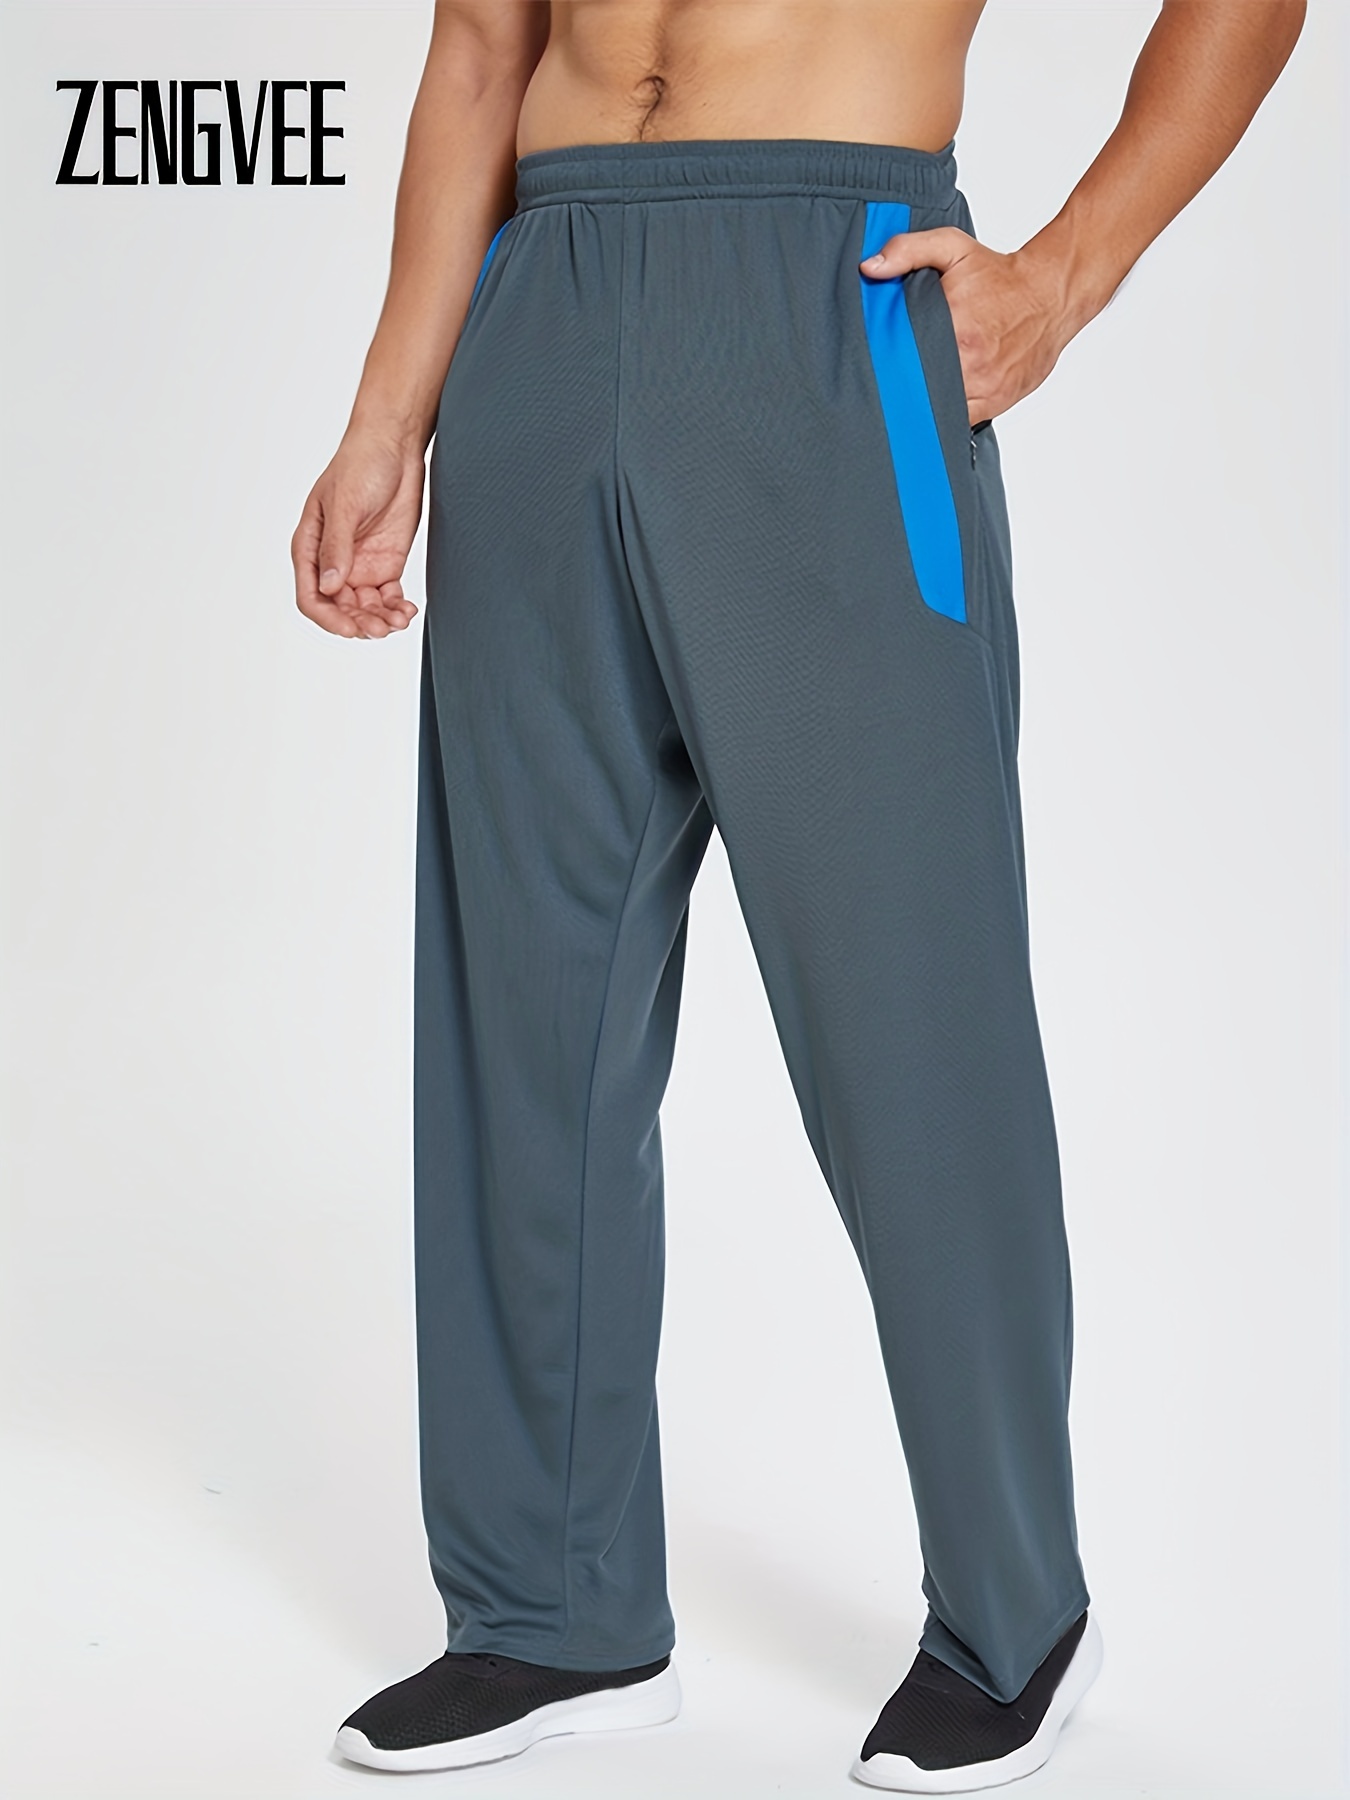 Athletic Works Casual Sweatpants for Women